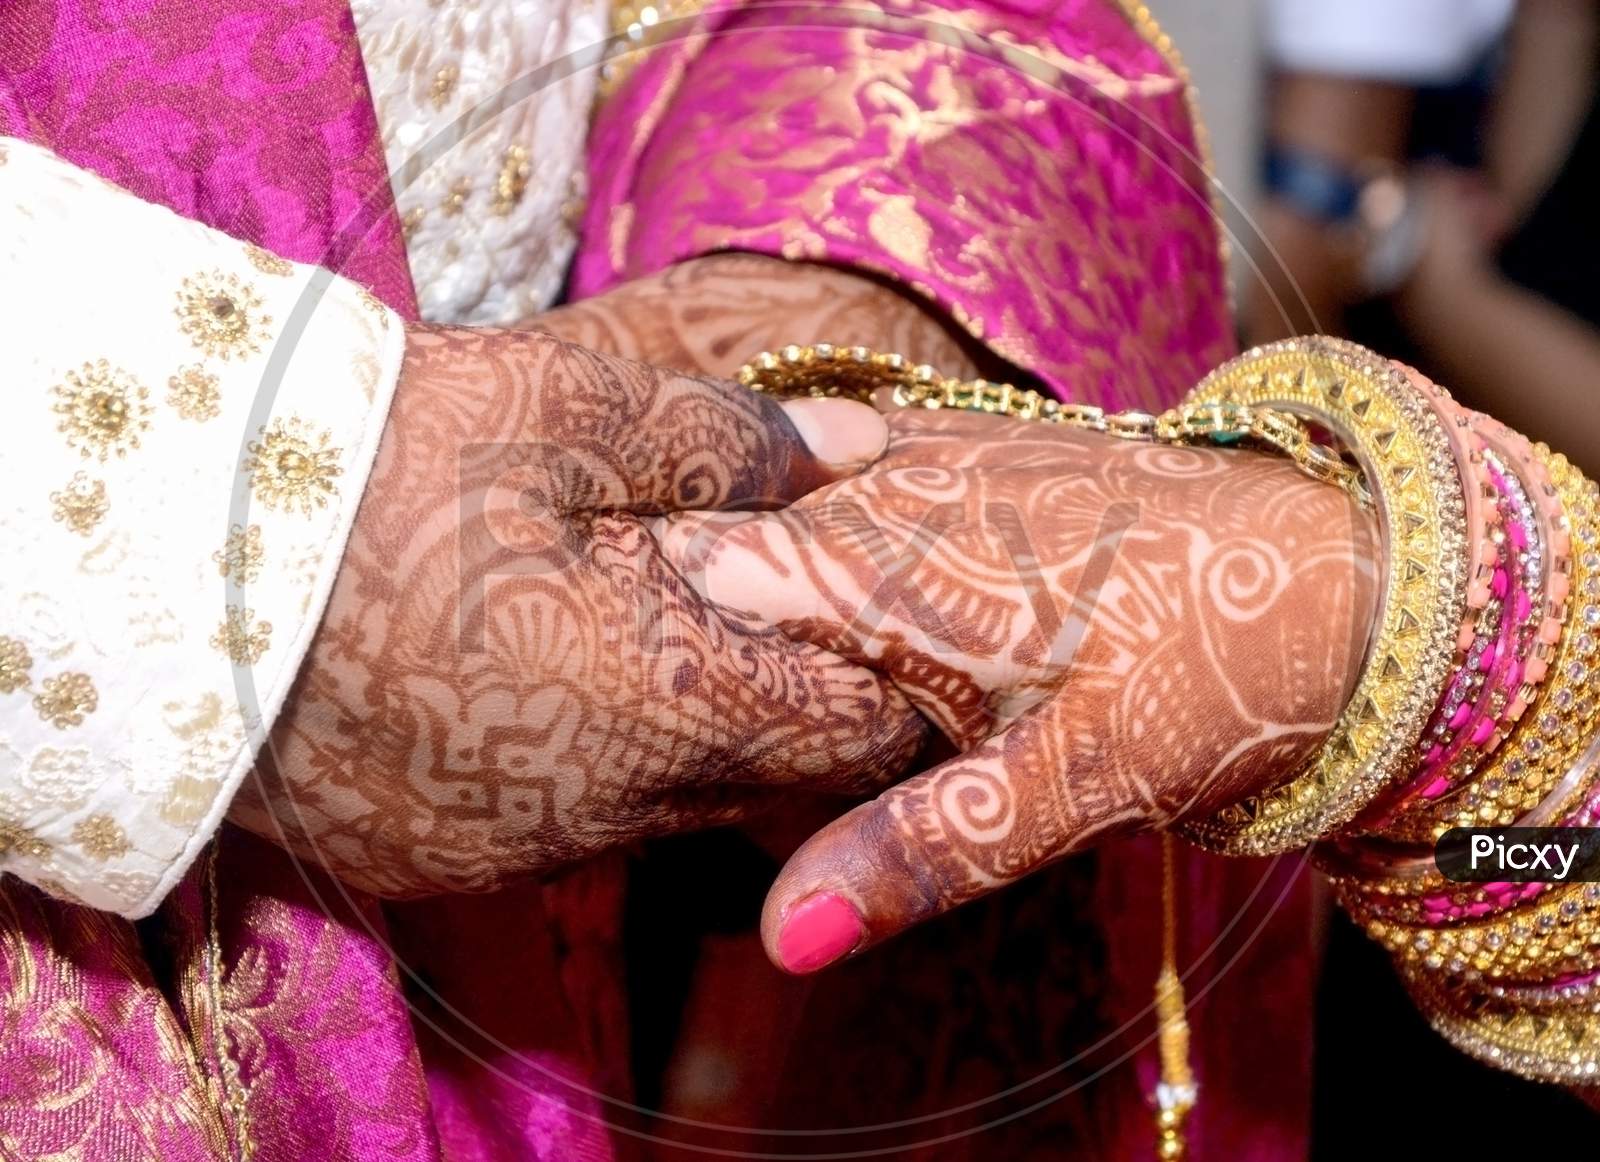 Closup Of Indian Young Adult Male Groom And Female Bride Holding Hands